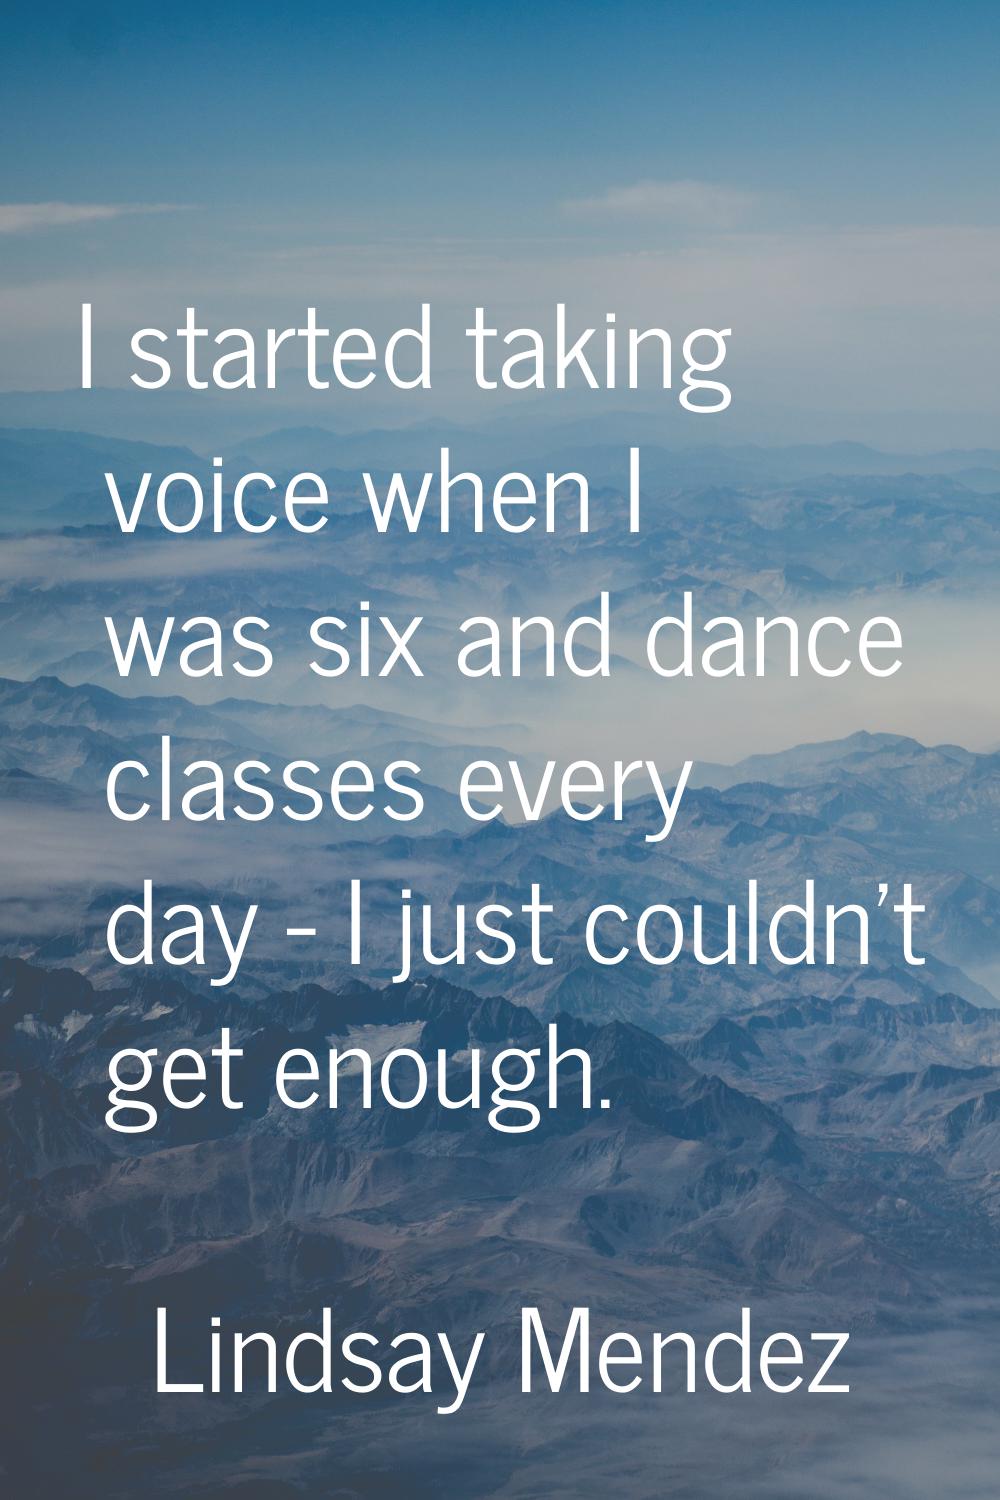 I started taking voice when I was six and dance classes every day - I just couldn't get enough.